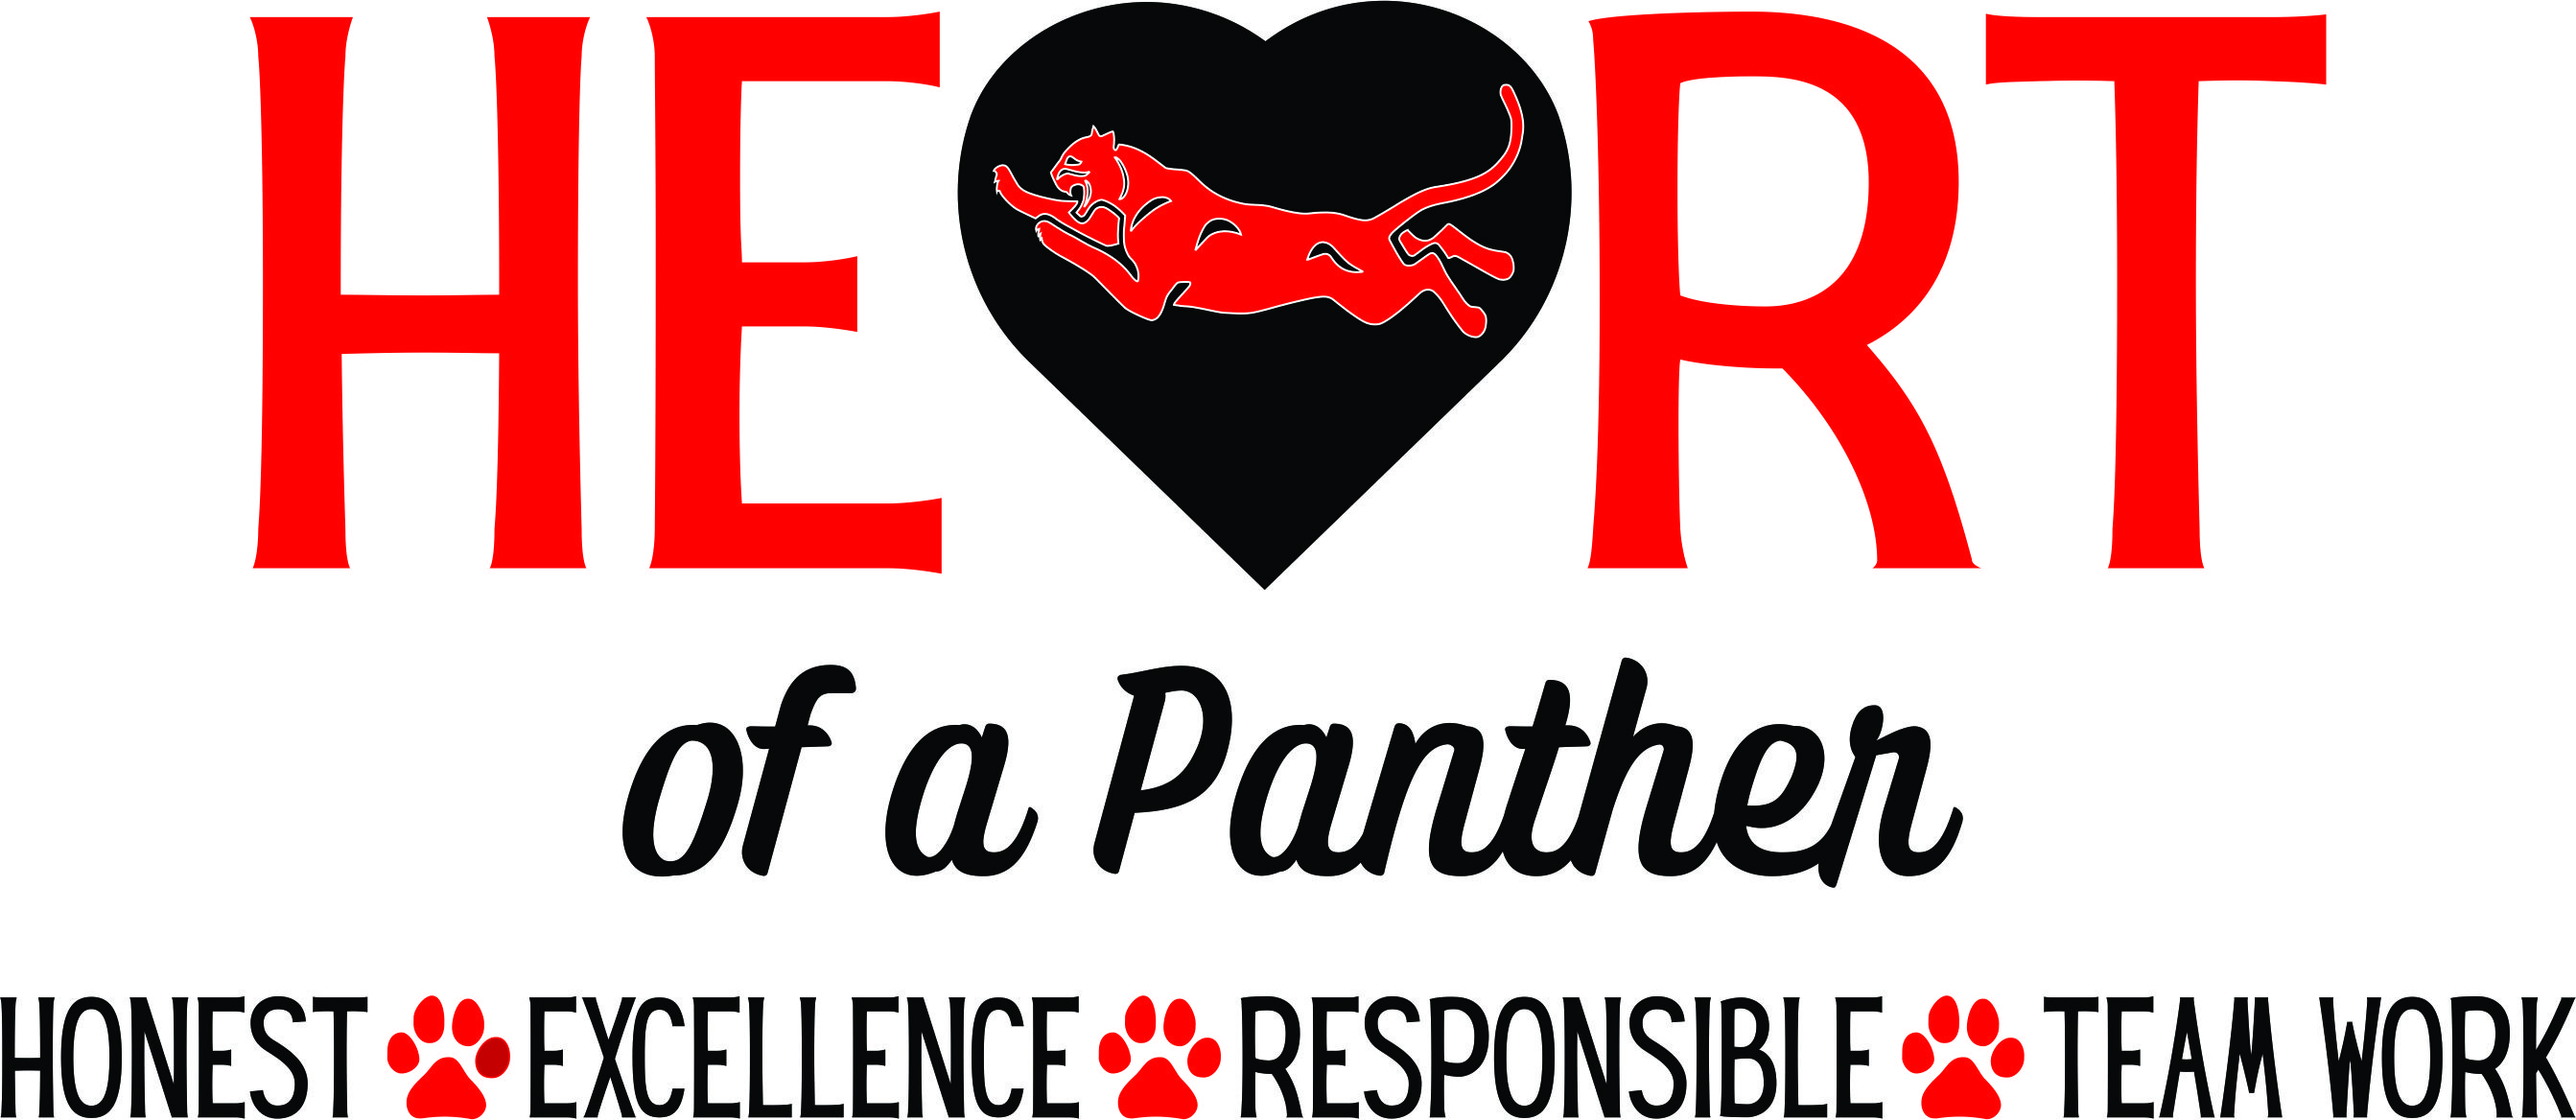 Heart of a Panther